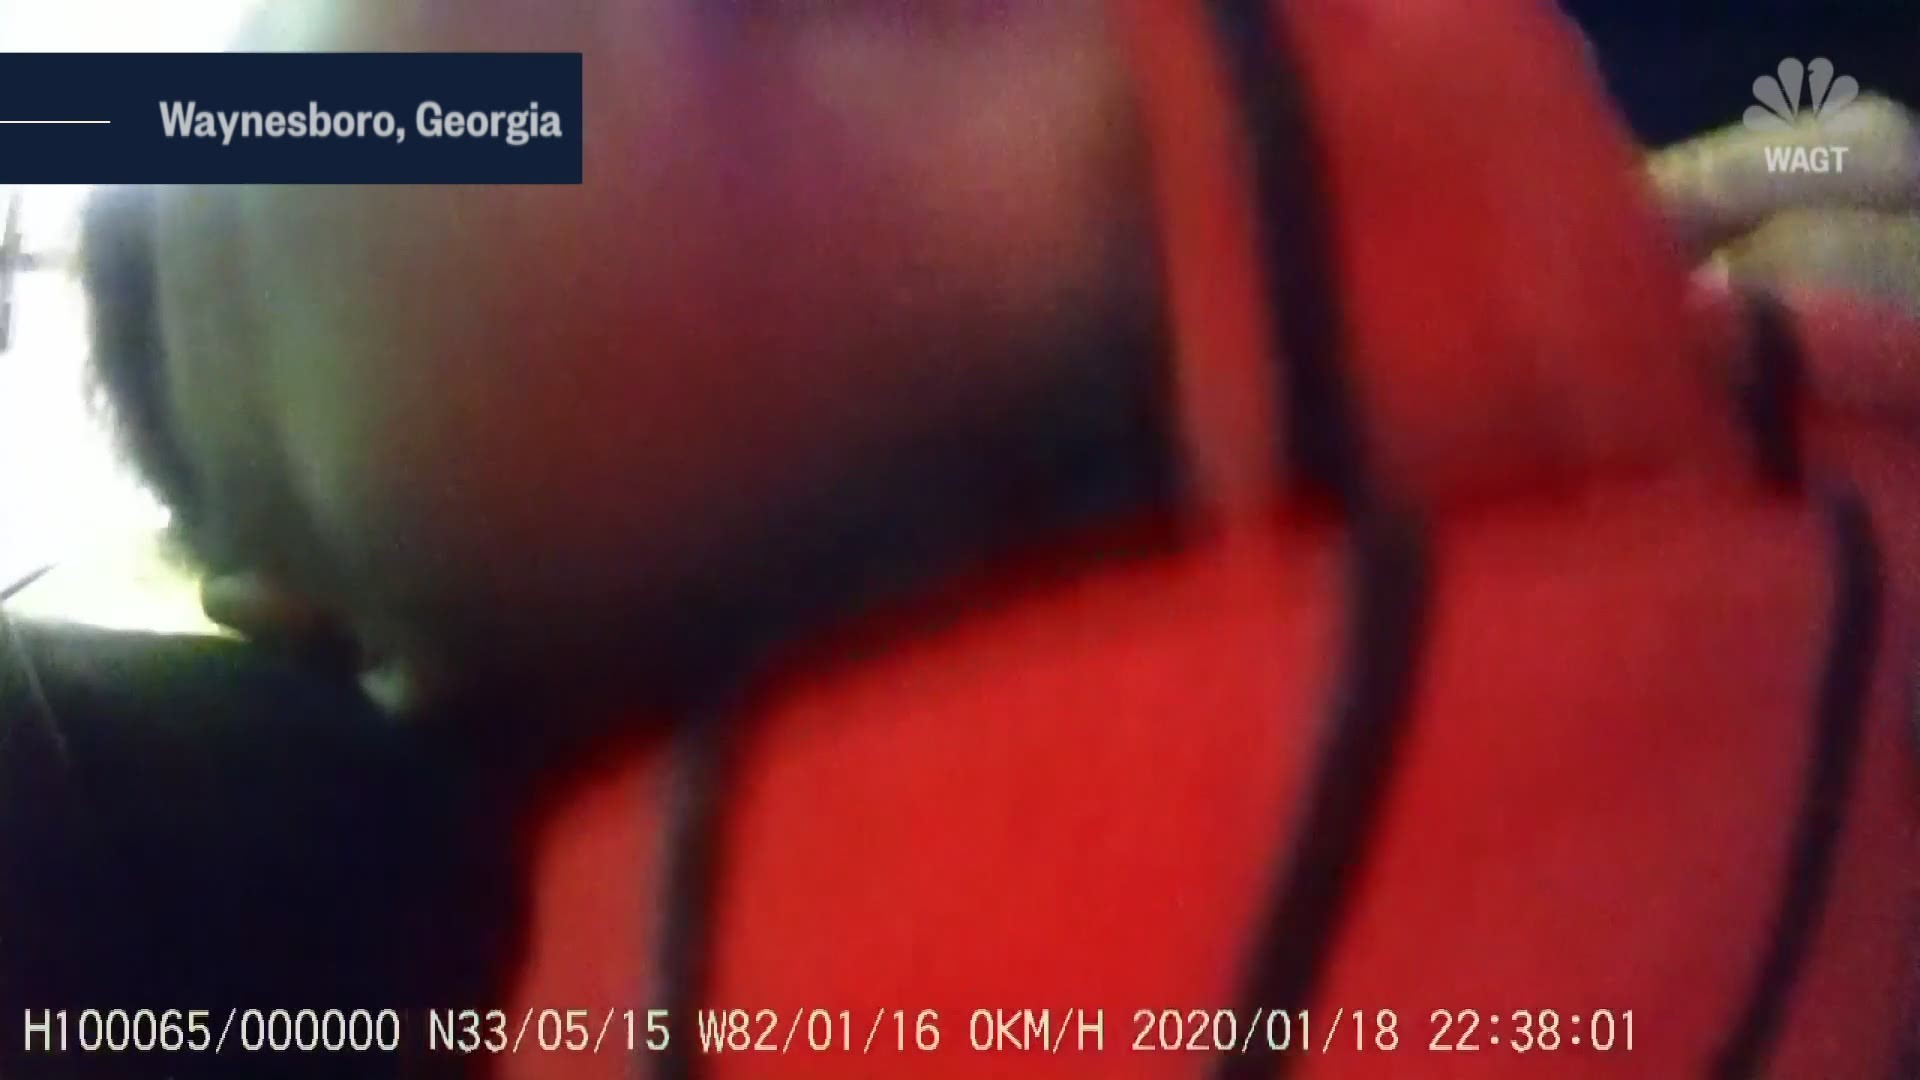 A Georgia police officer's body camera was rolling when he saved a six month old baby that had stopped breathing.